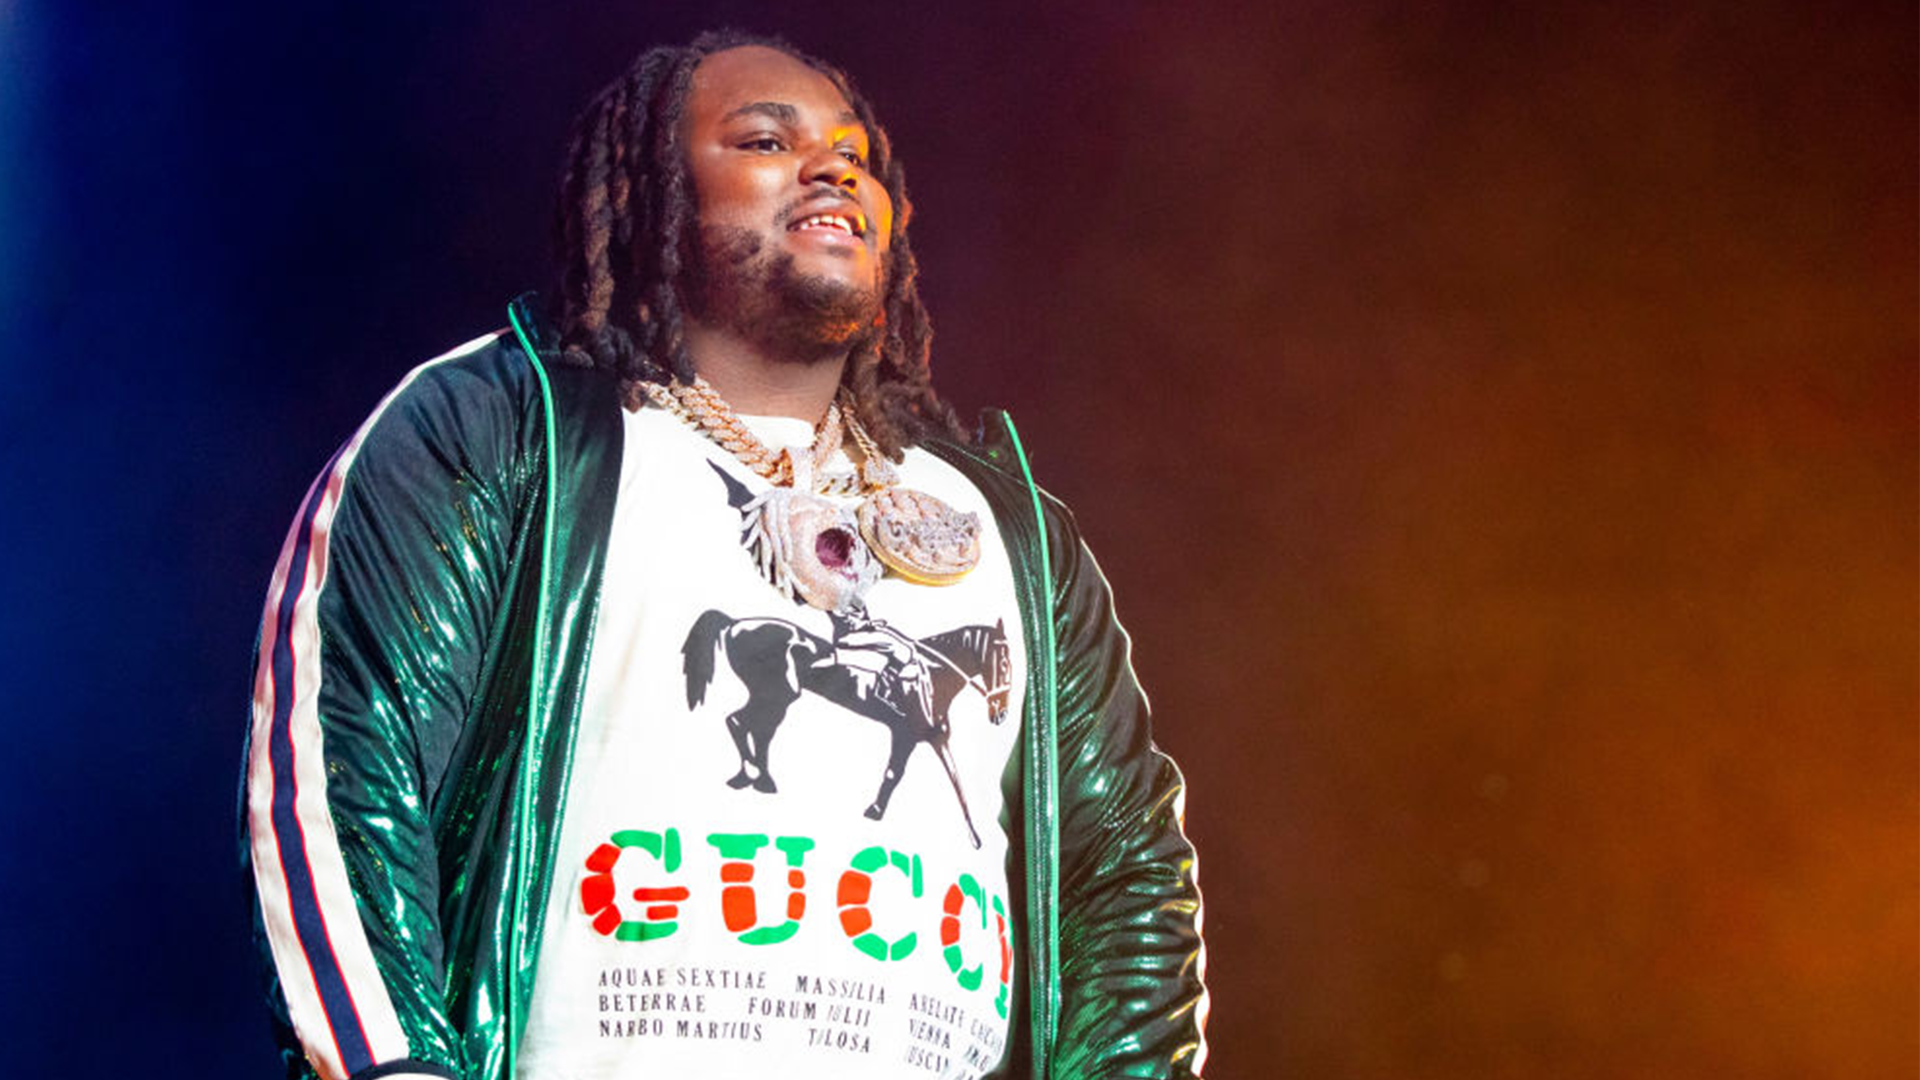 Tee Grizzley Partners With XSET To Help Former Inmates Re-Enter Society Through Gaming